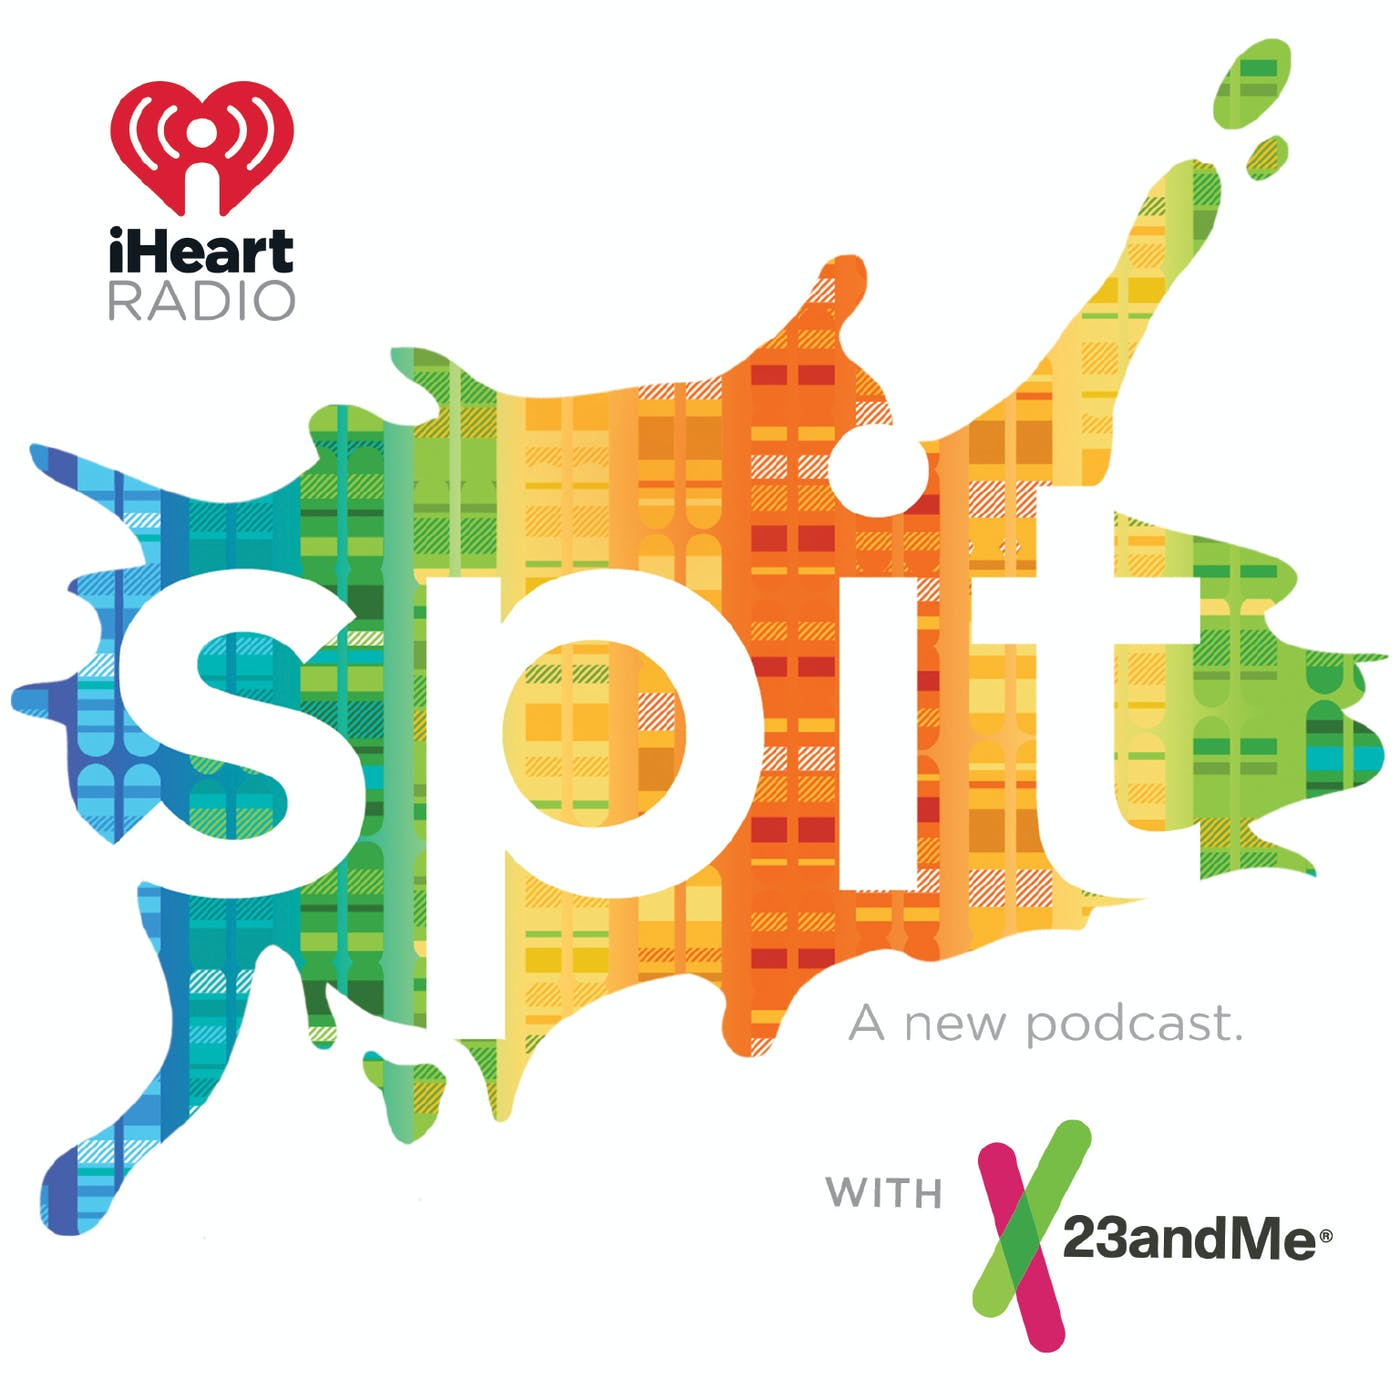 Coming soon. August 15th. Spit an iHeartRadio podcast with 23andMe